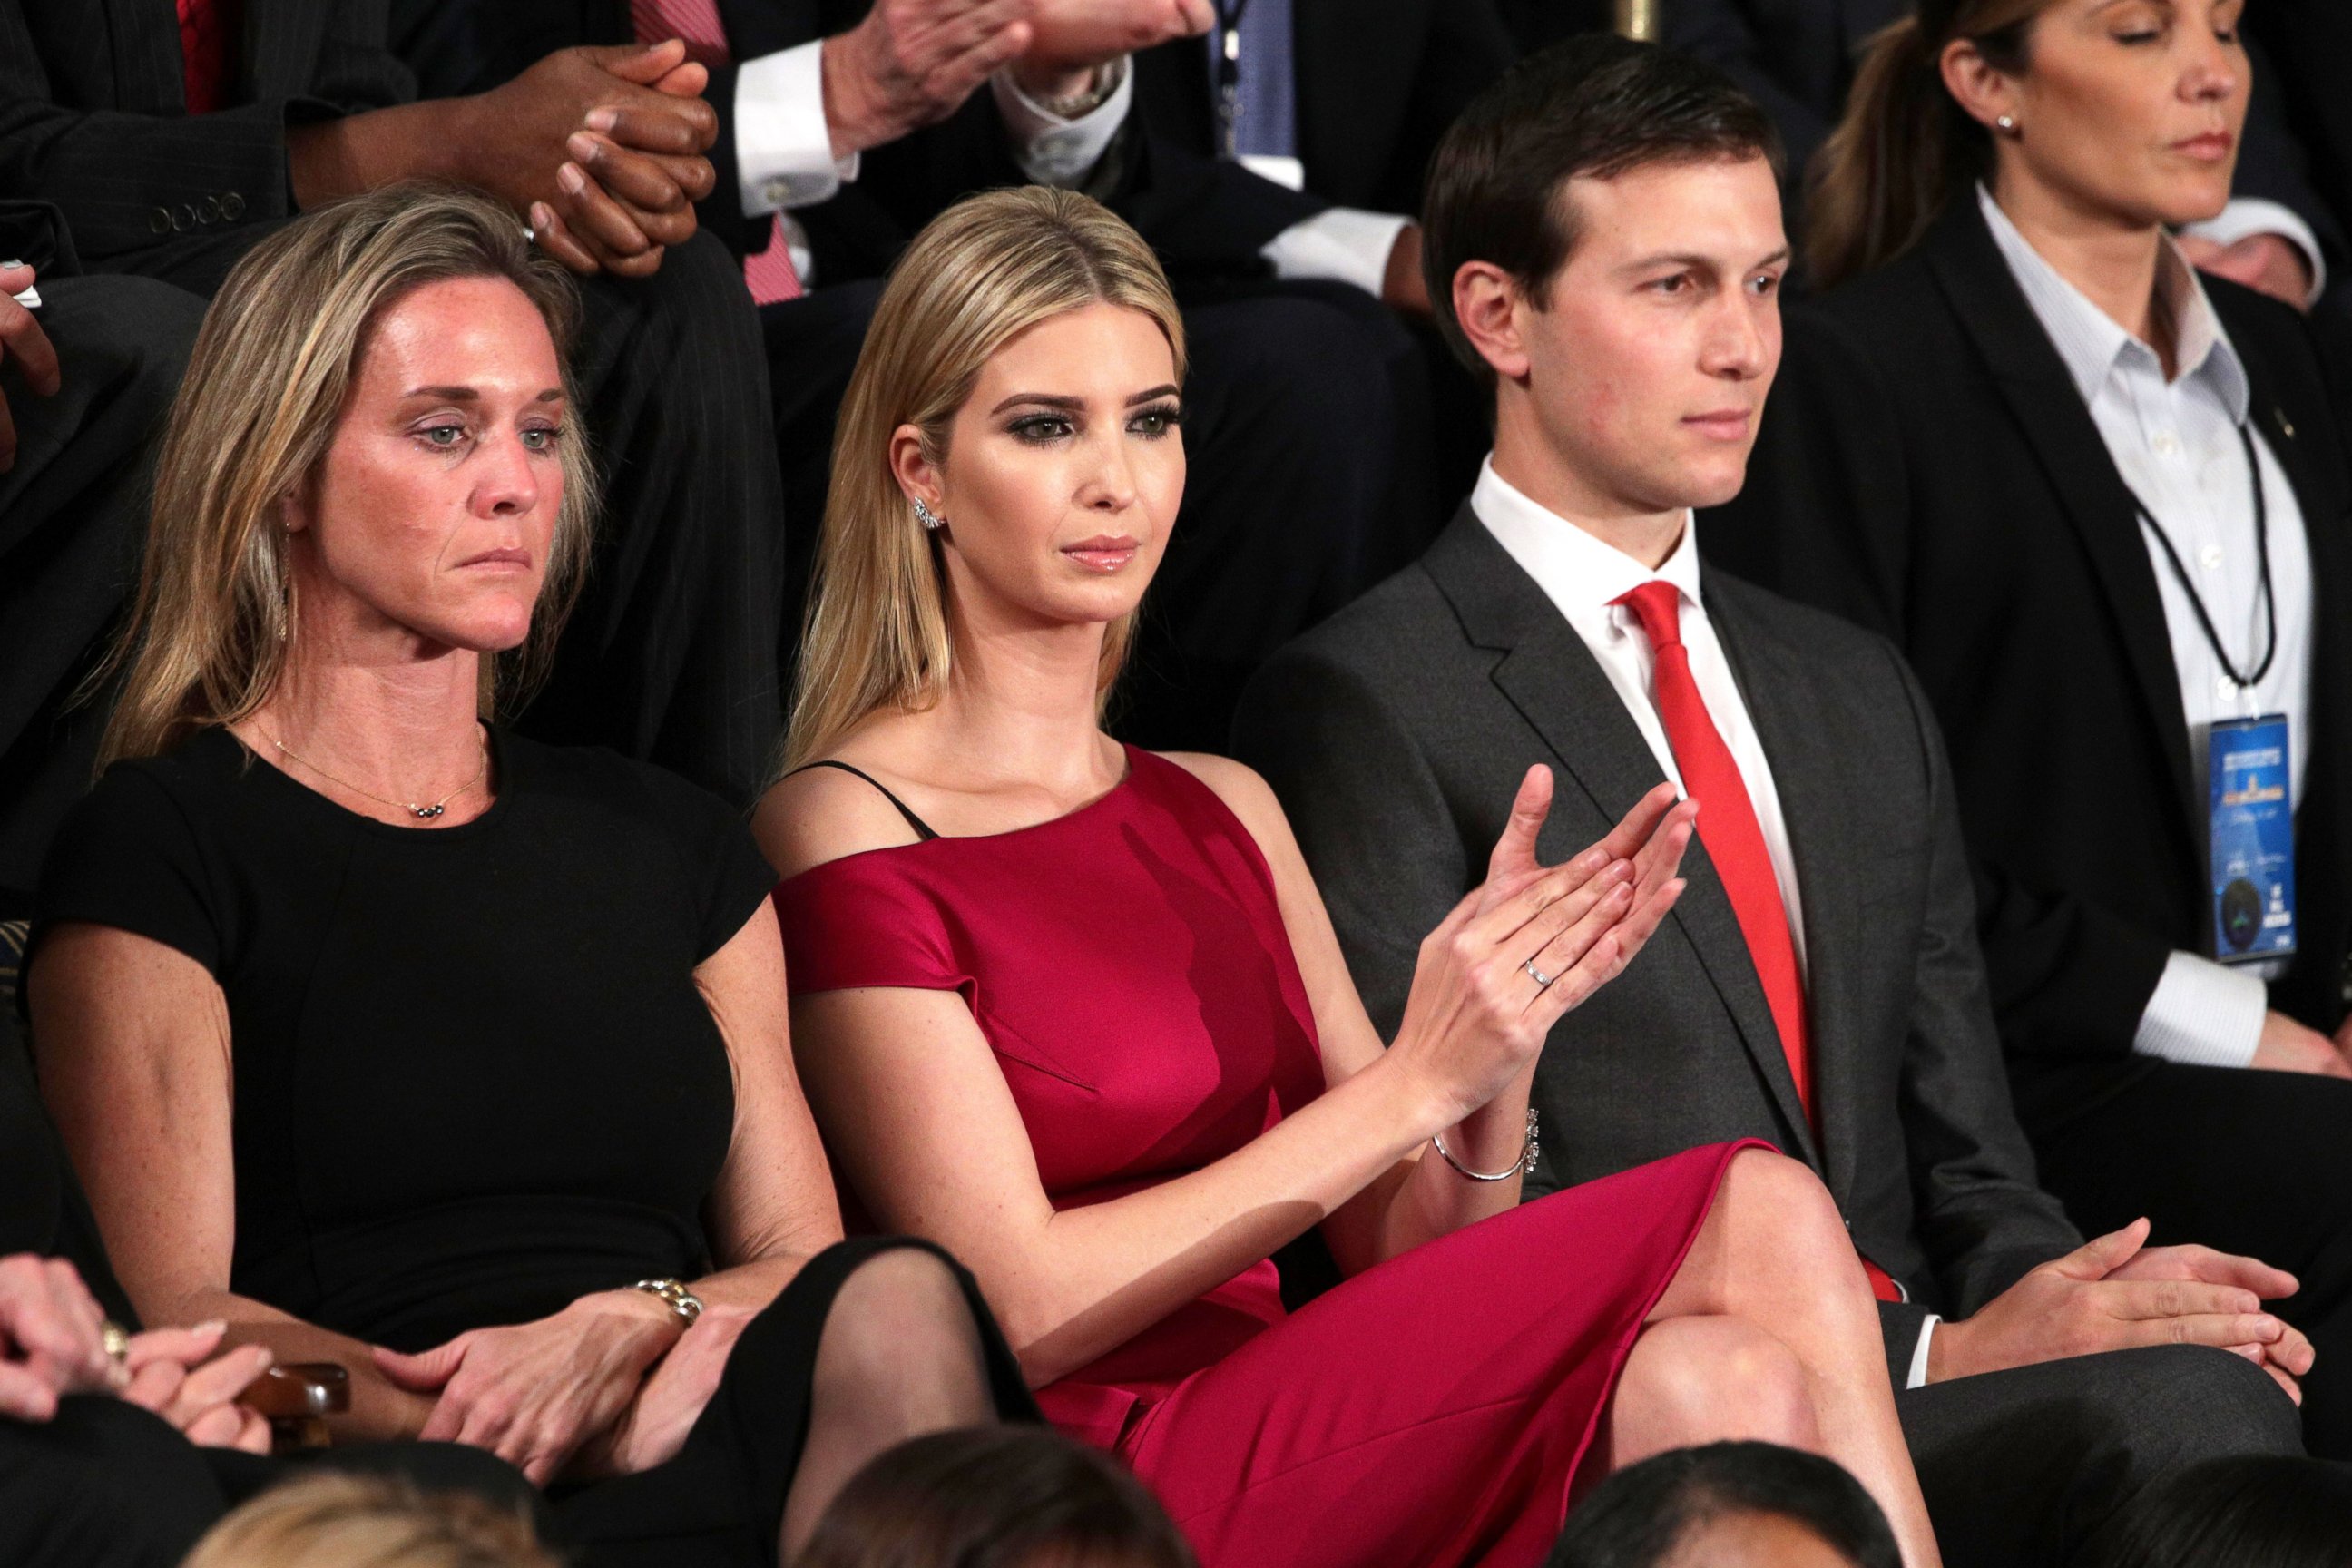 PHOTO: Ivanka Trump and White House Senior Advisor to the President for Strategic Planning Jared Kushner look on as President Donald Trump addresses a joint session of the U.S. Congress on Feb. 28, 2017 in Washington, DC.